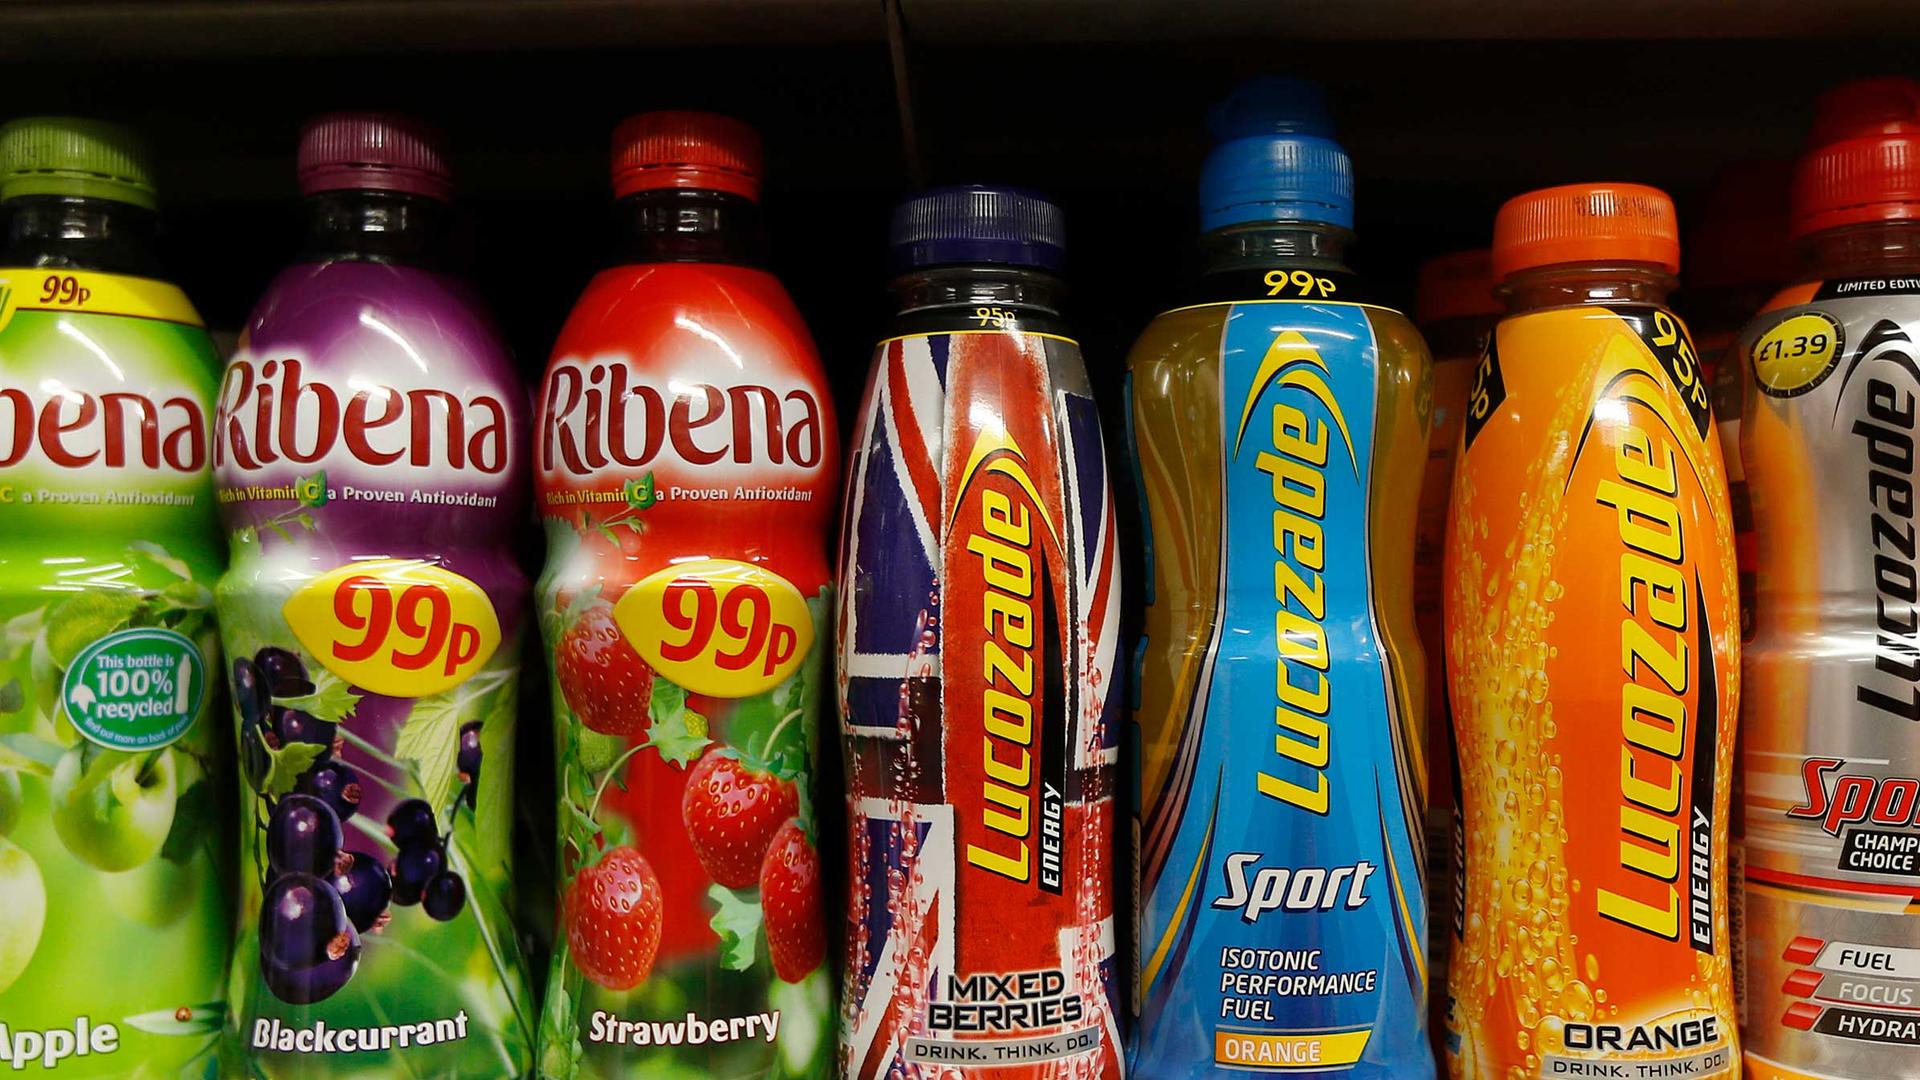 Sweetened juices and sports drinks in bottles are lined up in a row